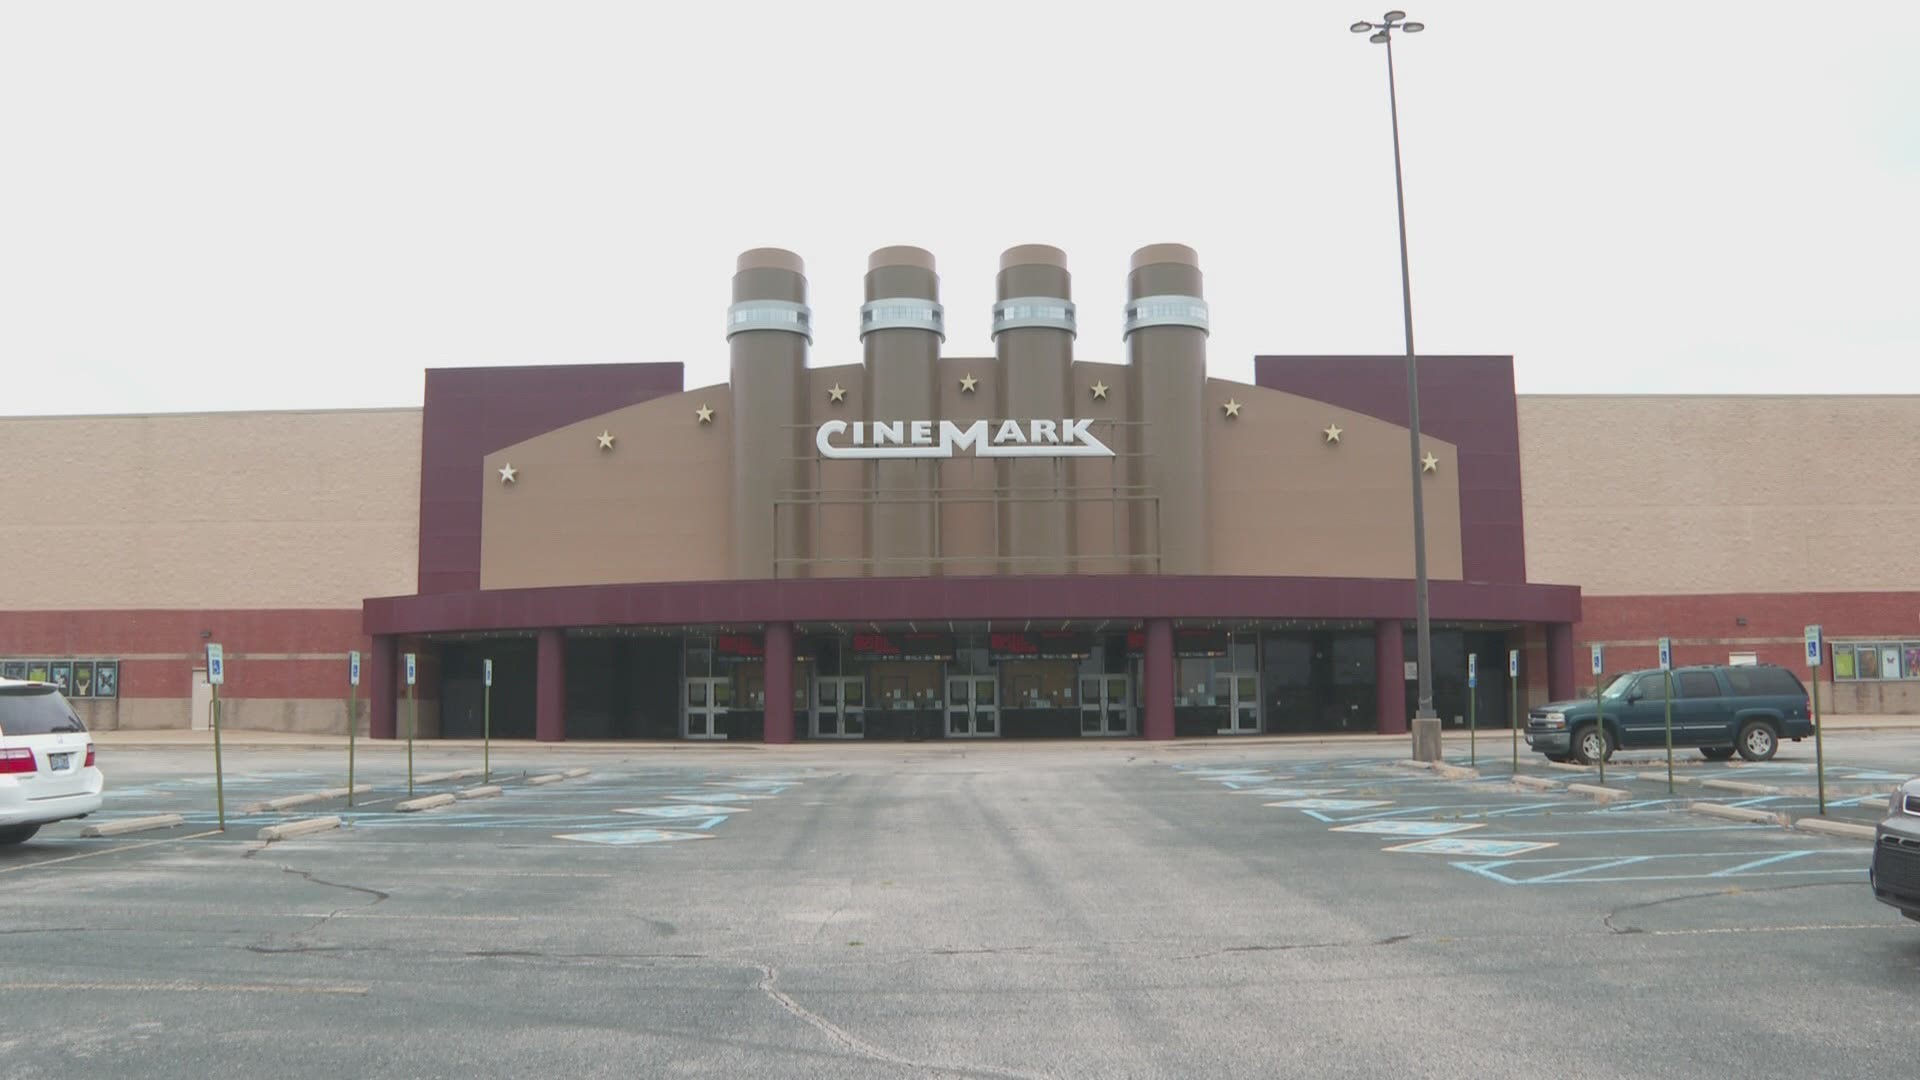 Cinemark Tinseltown is scheduled to reopen with new COVID-19 guidelines.